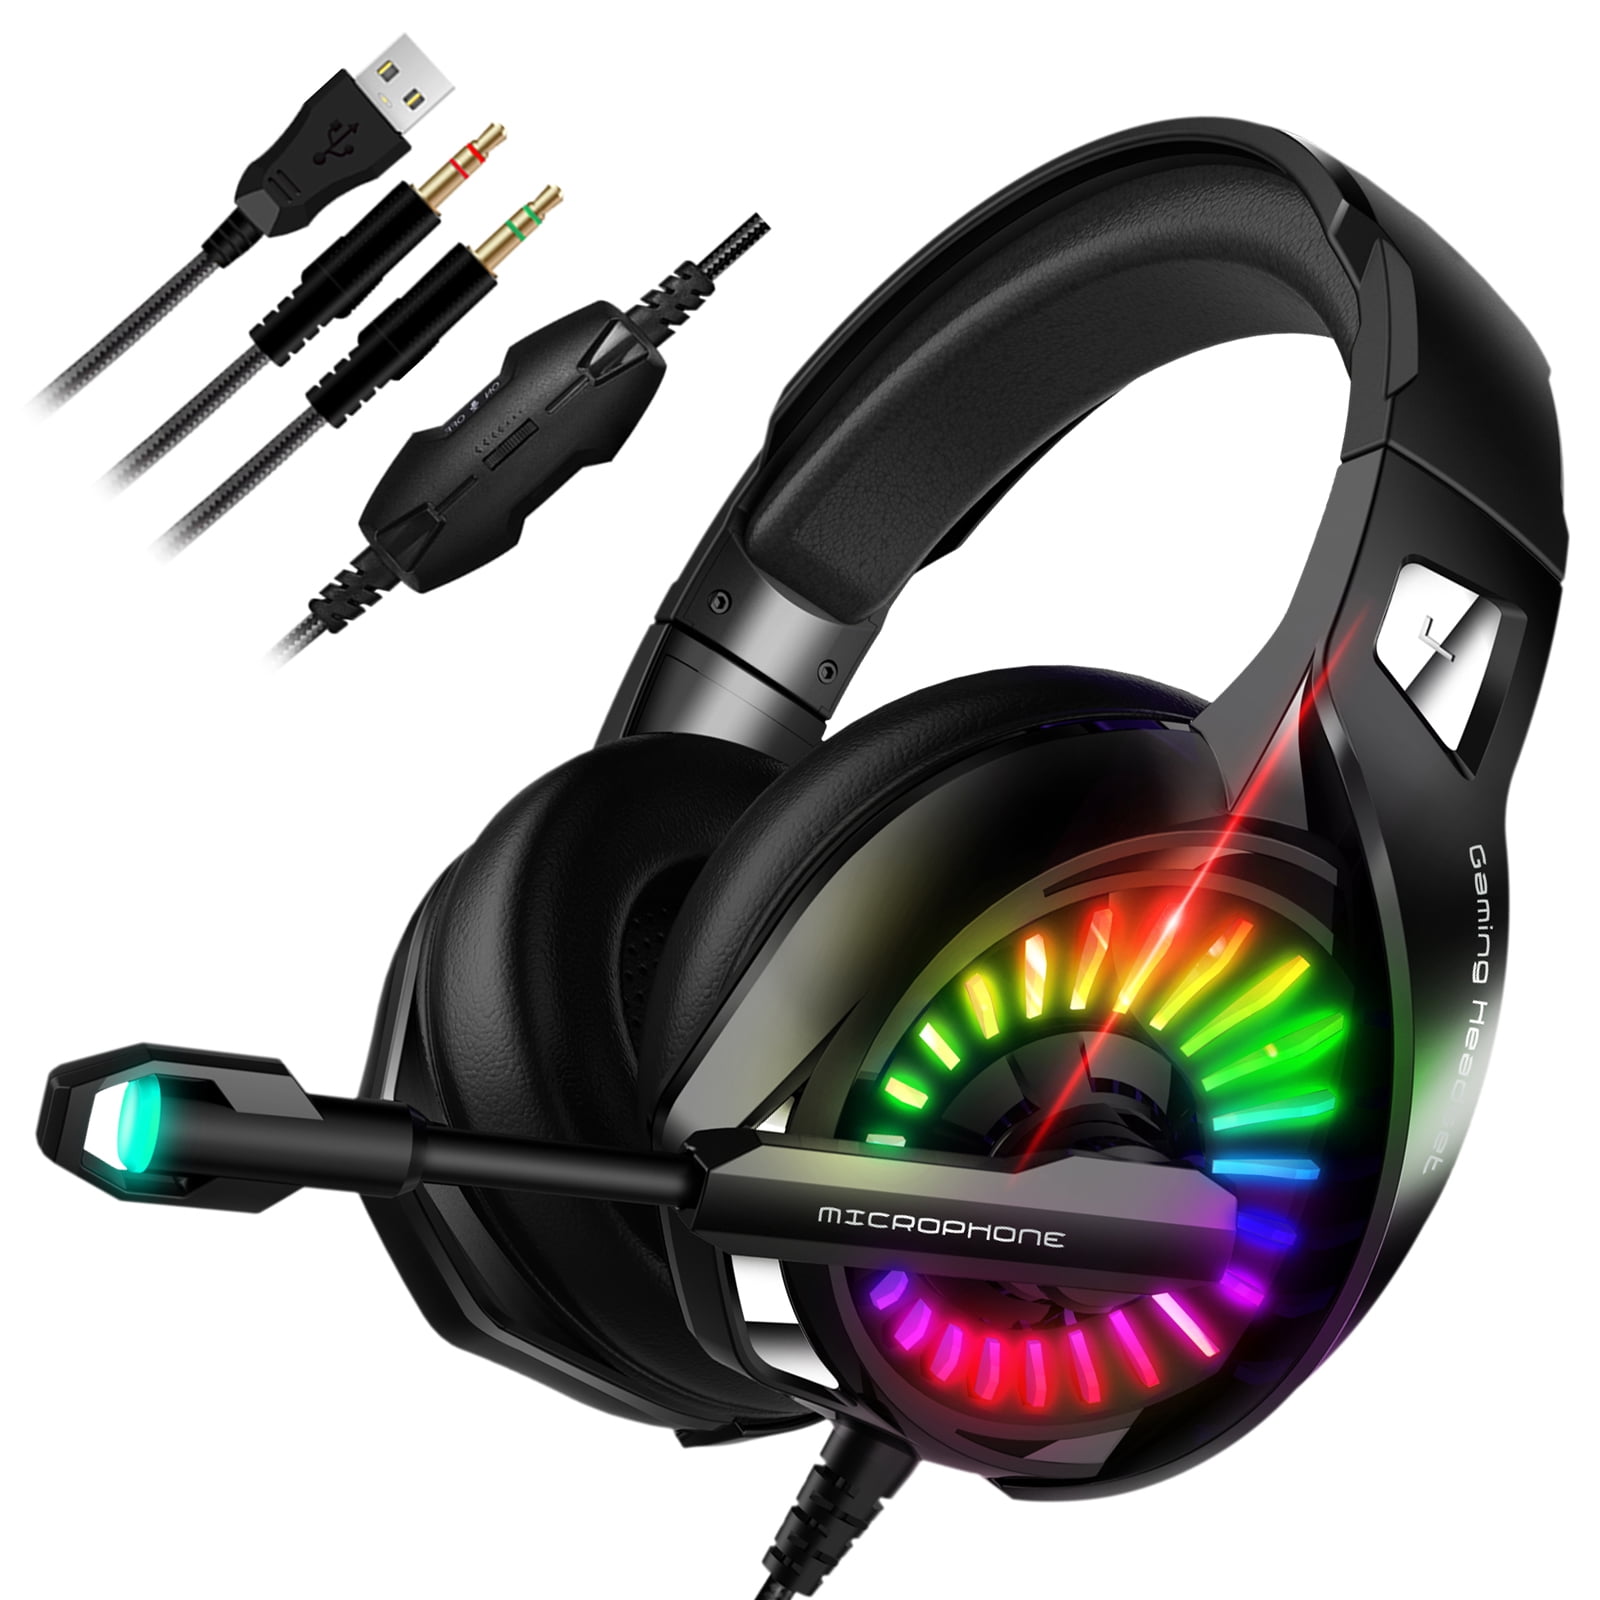 Impermeable Talla tetraedro TSV Gaming Headset for PC, PS4, Xbox One - 7.1 Surround Sound Headphones  Over-Ear with Noise Canceling Microphone, RGB Backlit Lights, Memory  Earmuffs, 3.5mm Wired Headset for PC, Laptop, Mobile, Mac -